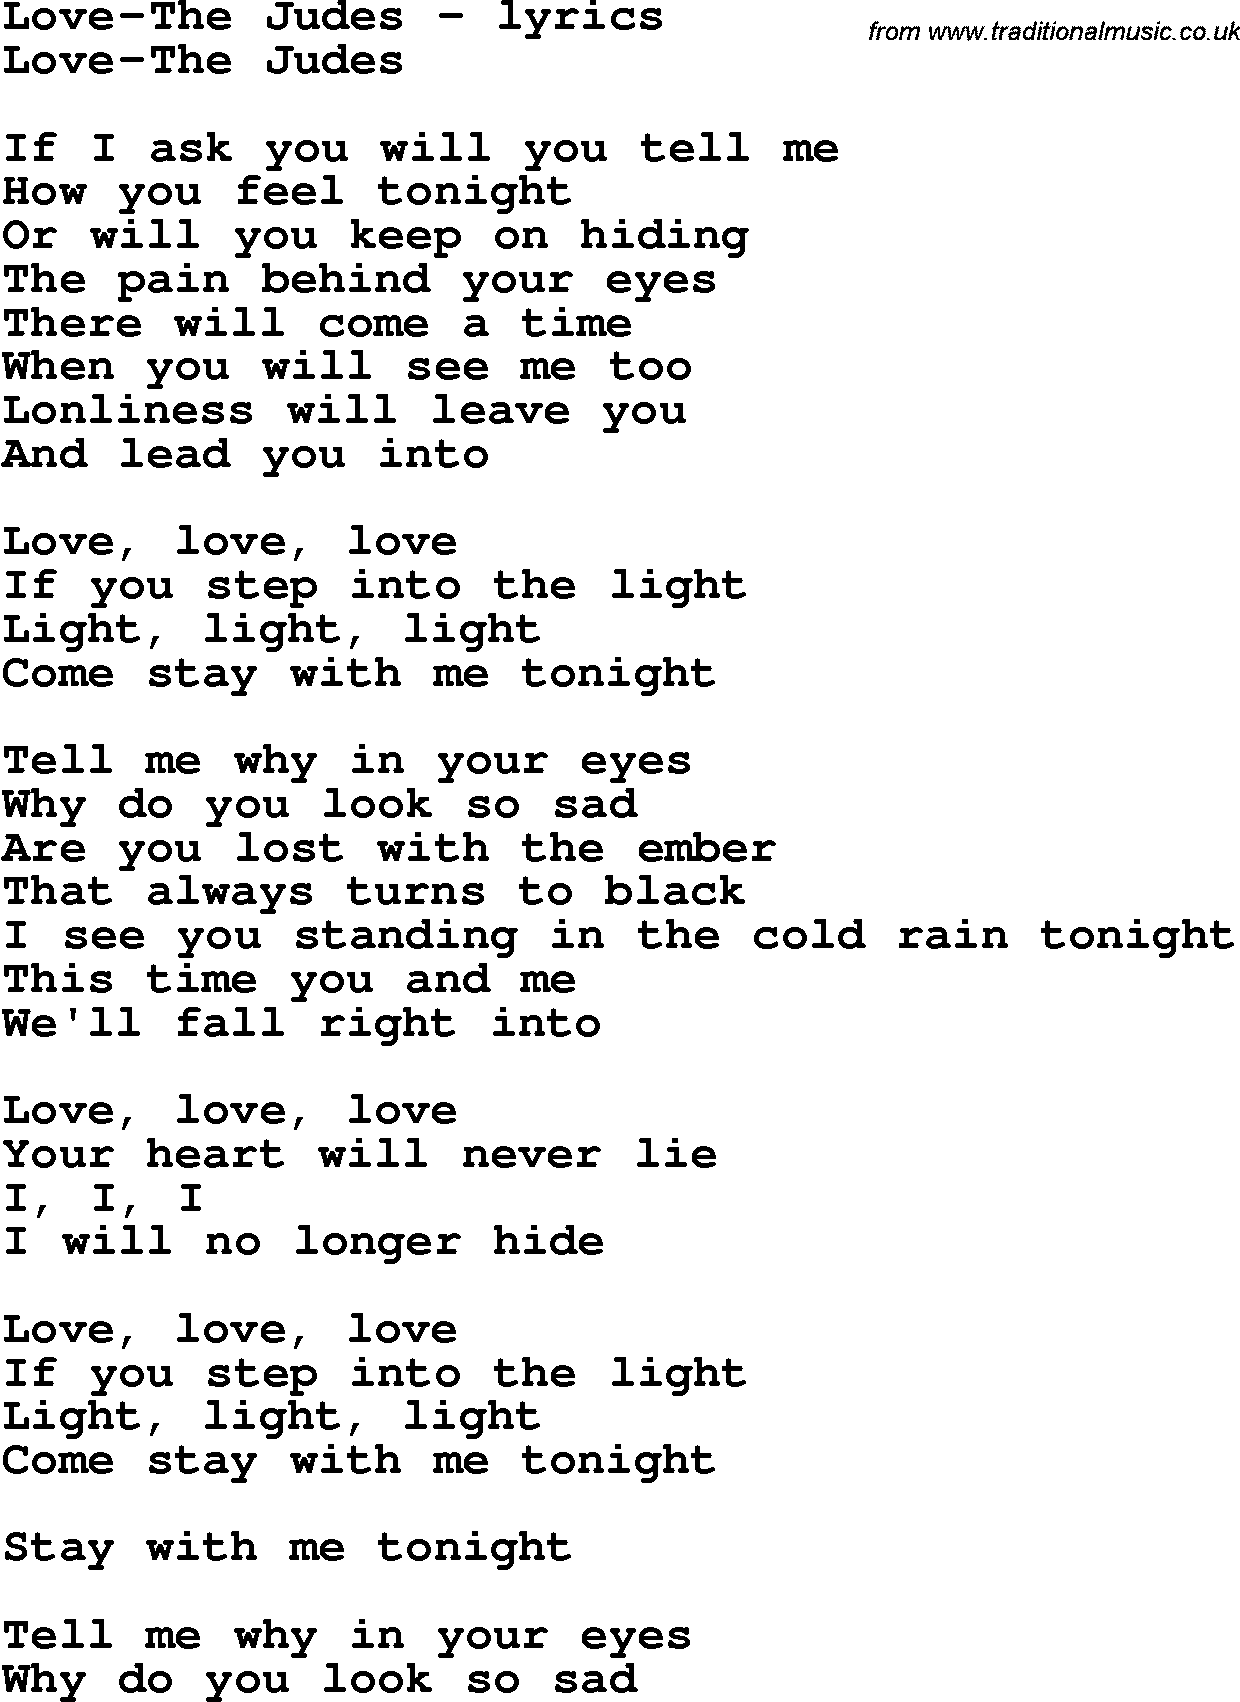 Love Song Lyrics for: Love-The Judes